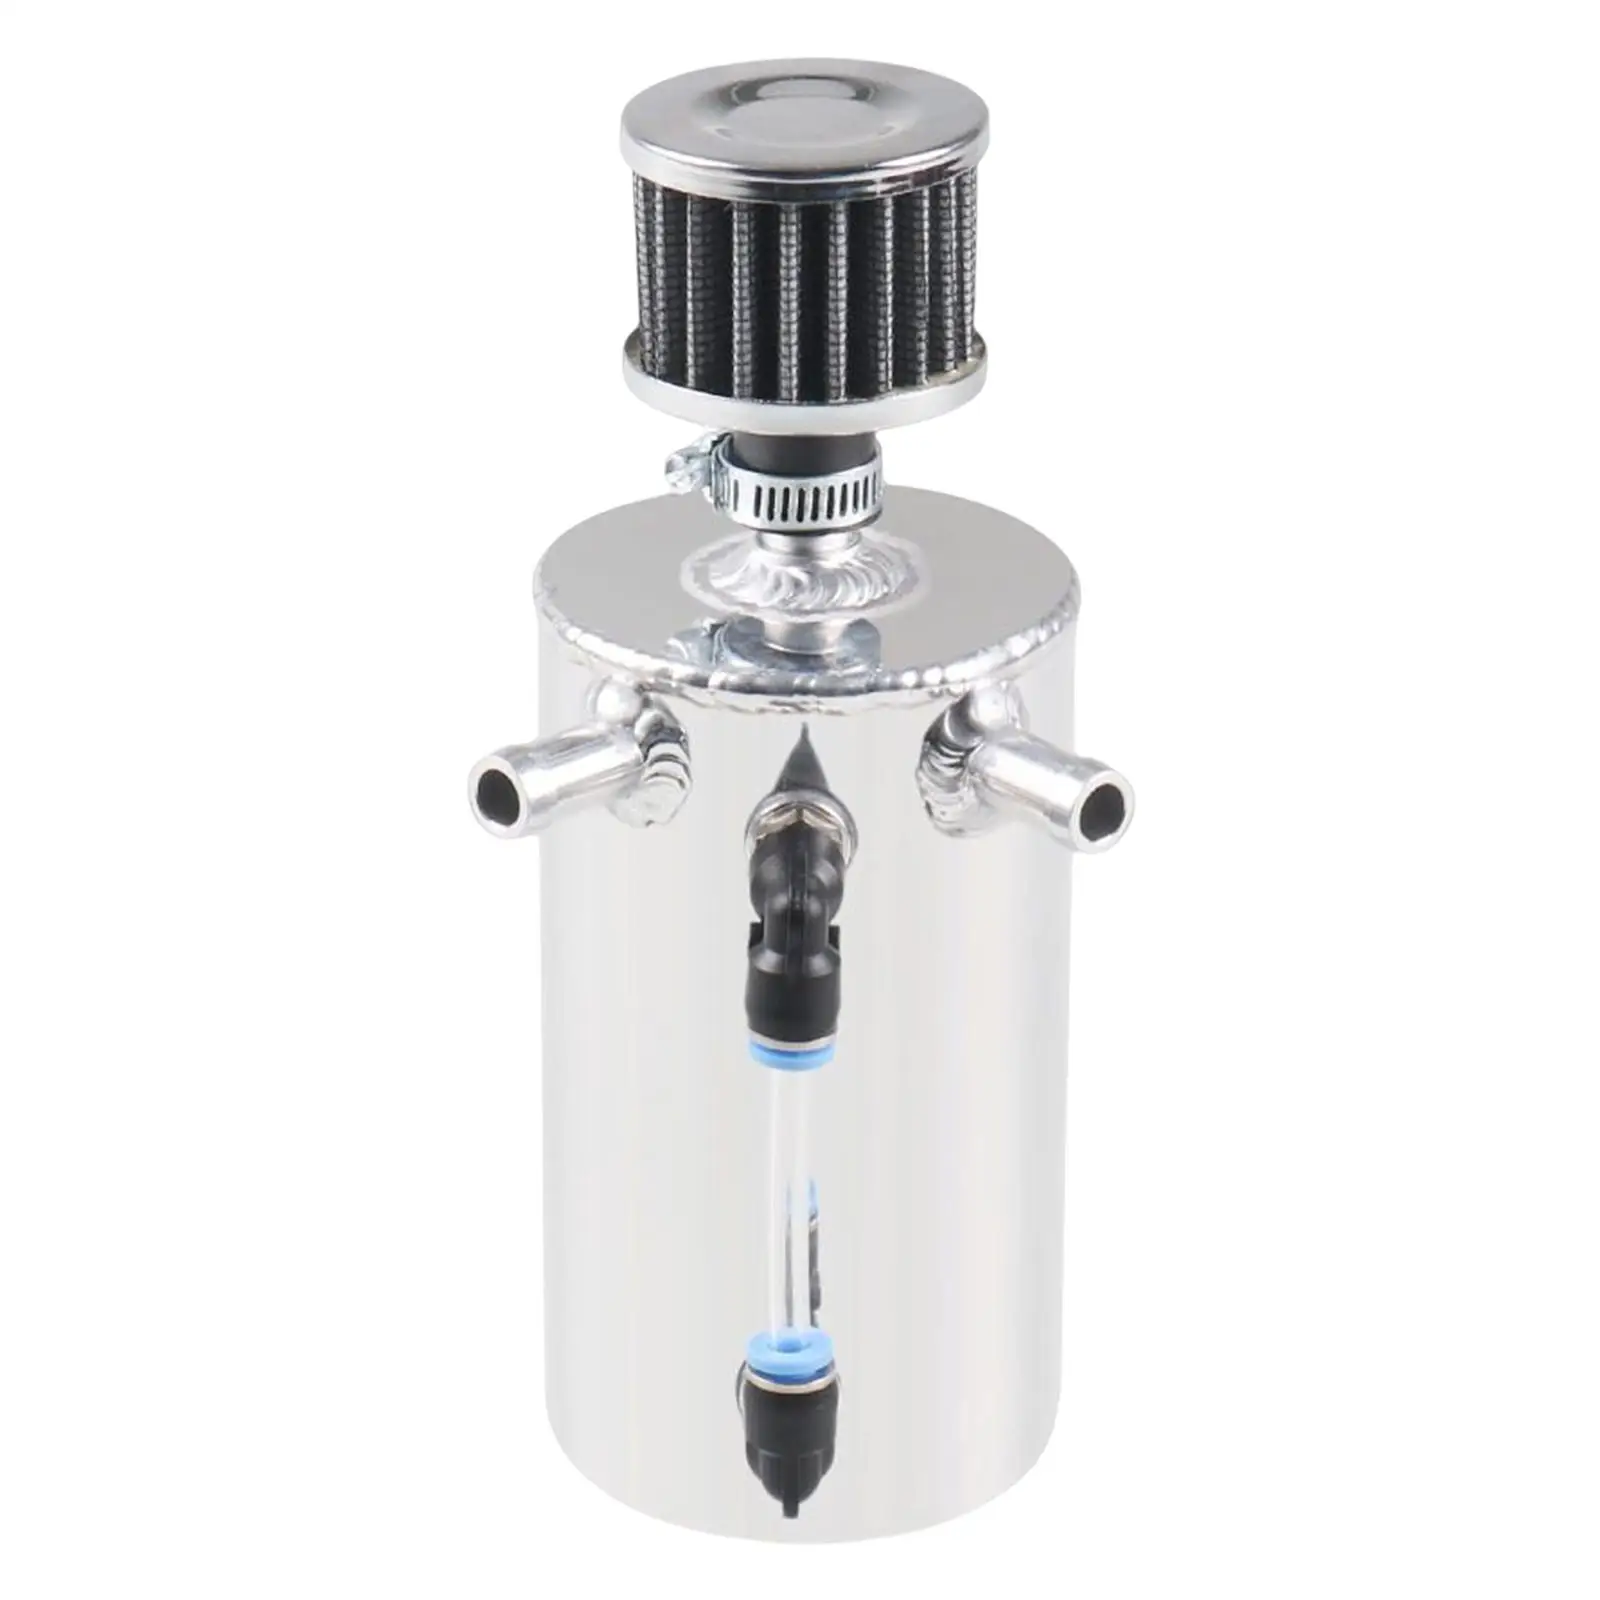 Car Oil Catch Can Tank 0.5L Engine Air Oil Separator Compact Silver with Breather Modified Automotive Reservoir Tank Oil Pot Kit